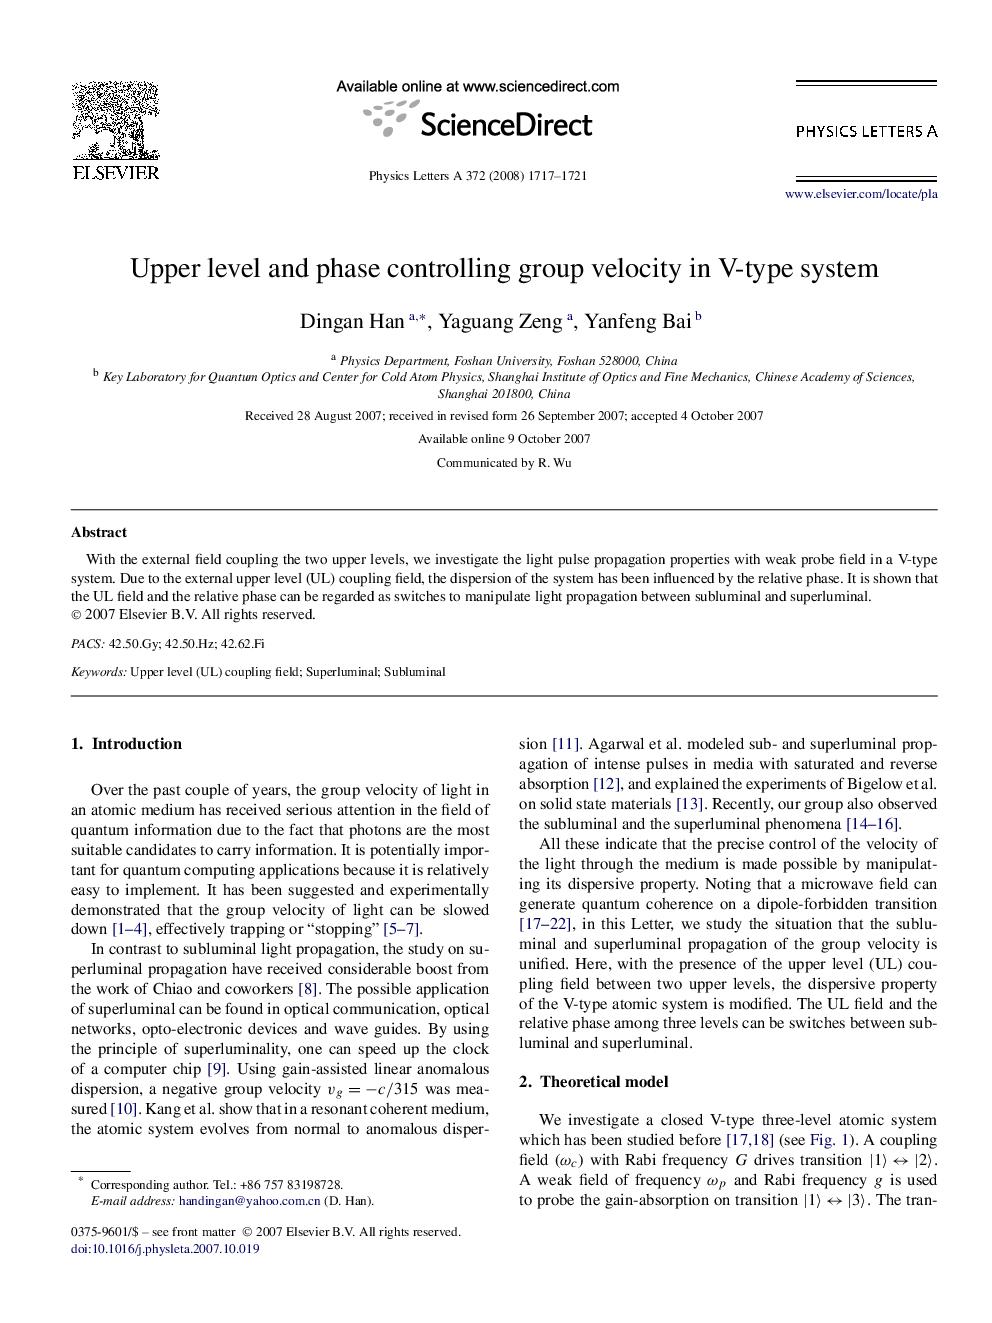 Upper level and phase controlling group velocity in V-type system